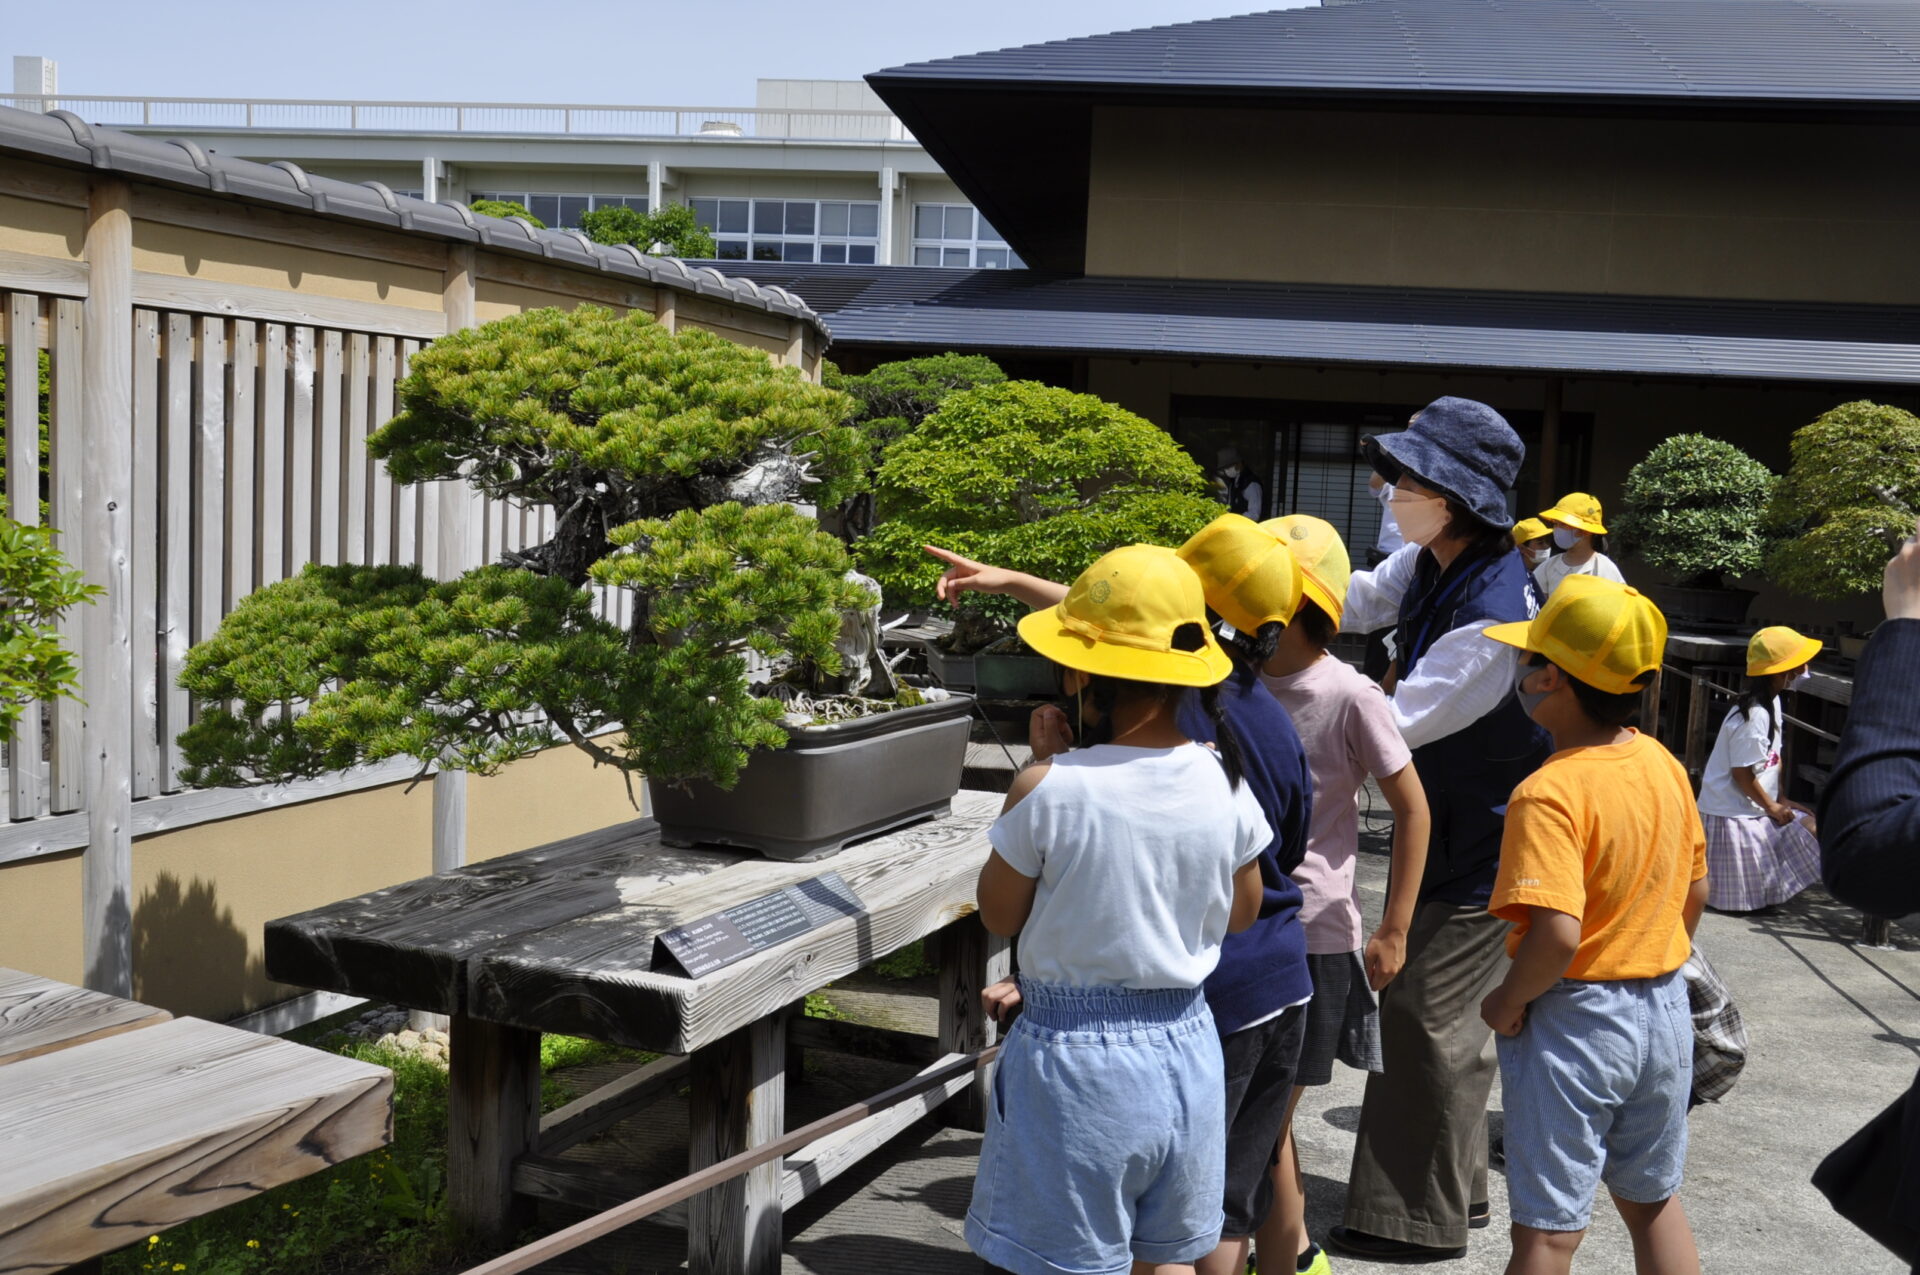 Introducing the exhibits to elementary school students (bonsai garden).